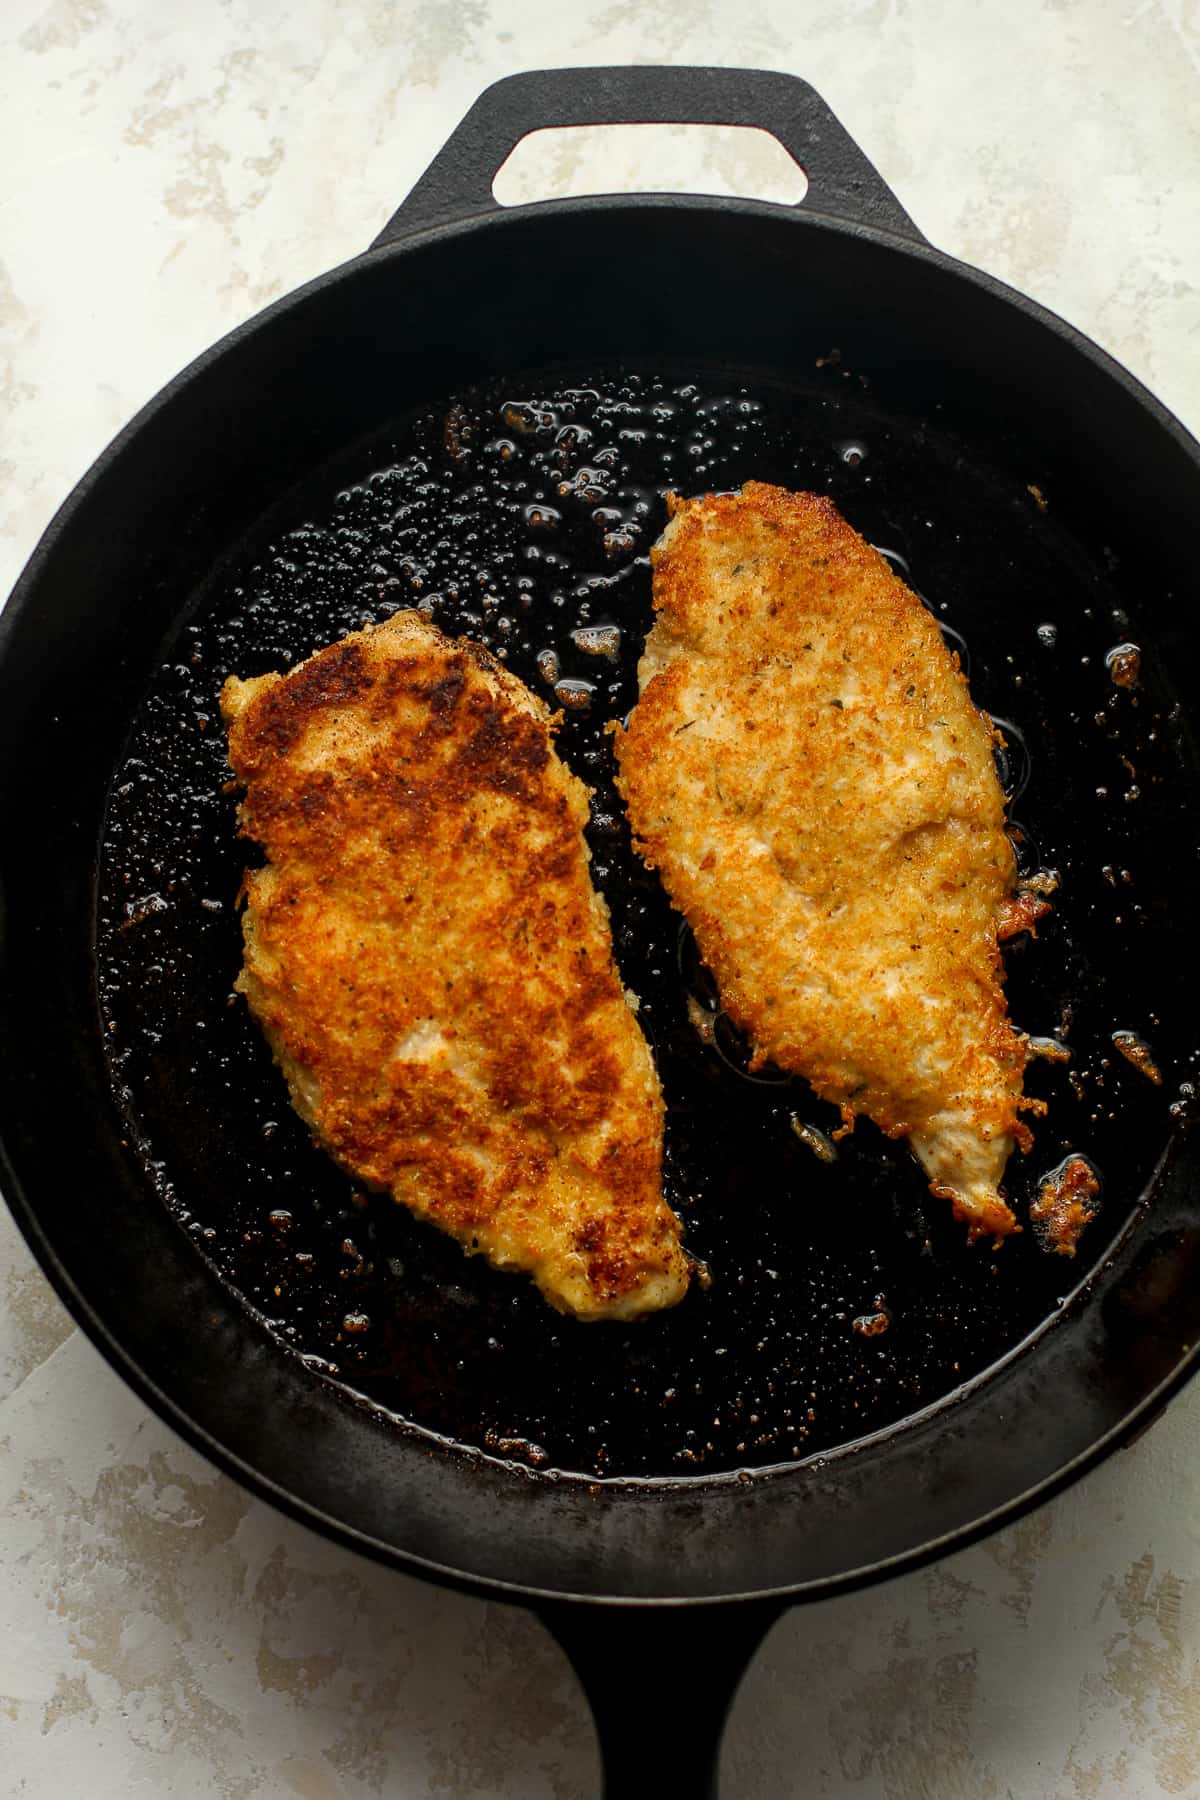 A skillet with two chicken breasts.